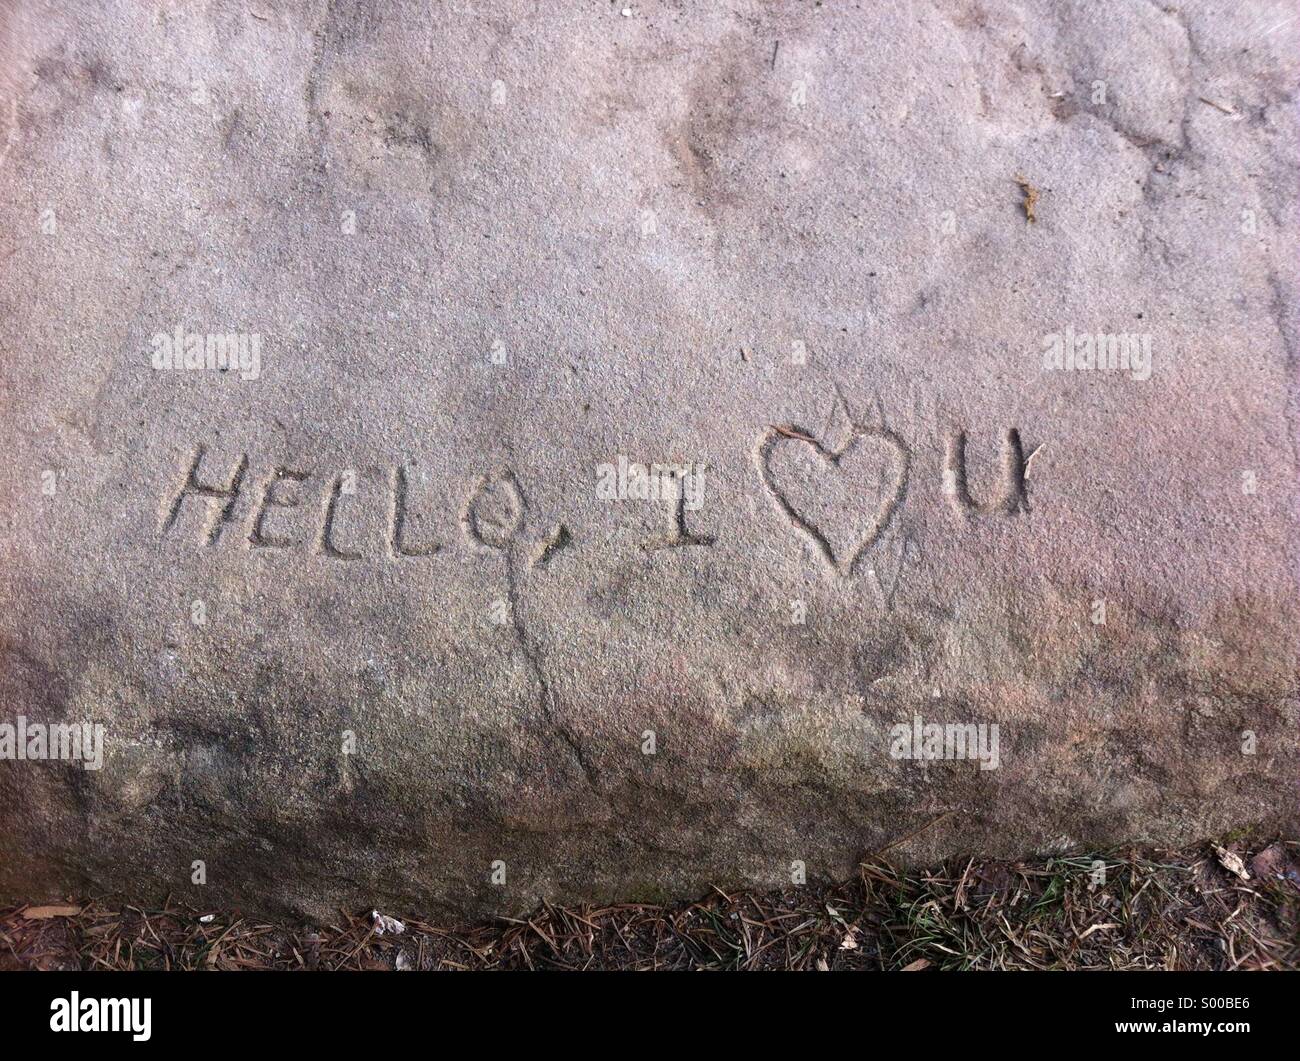 'Hello, I love you', carved into a rock. Stock Photo